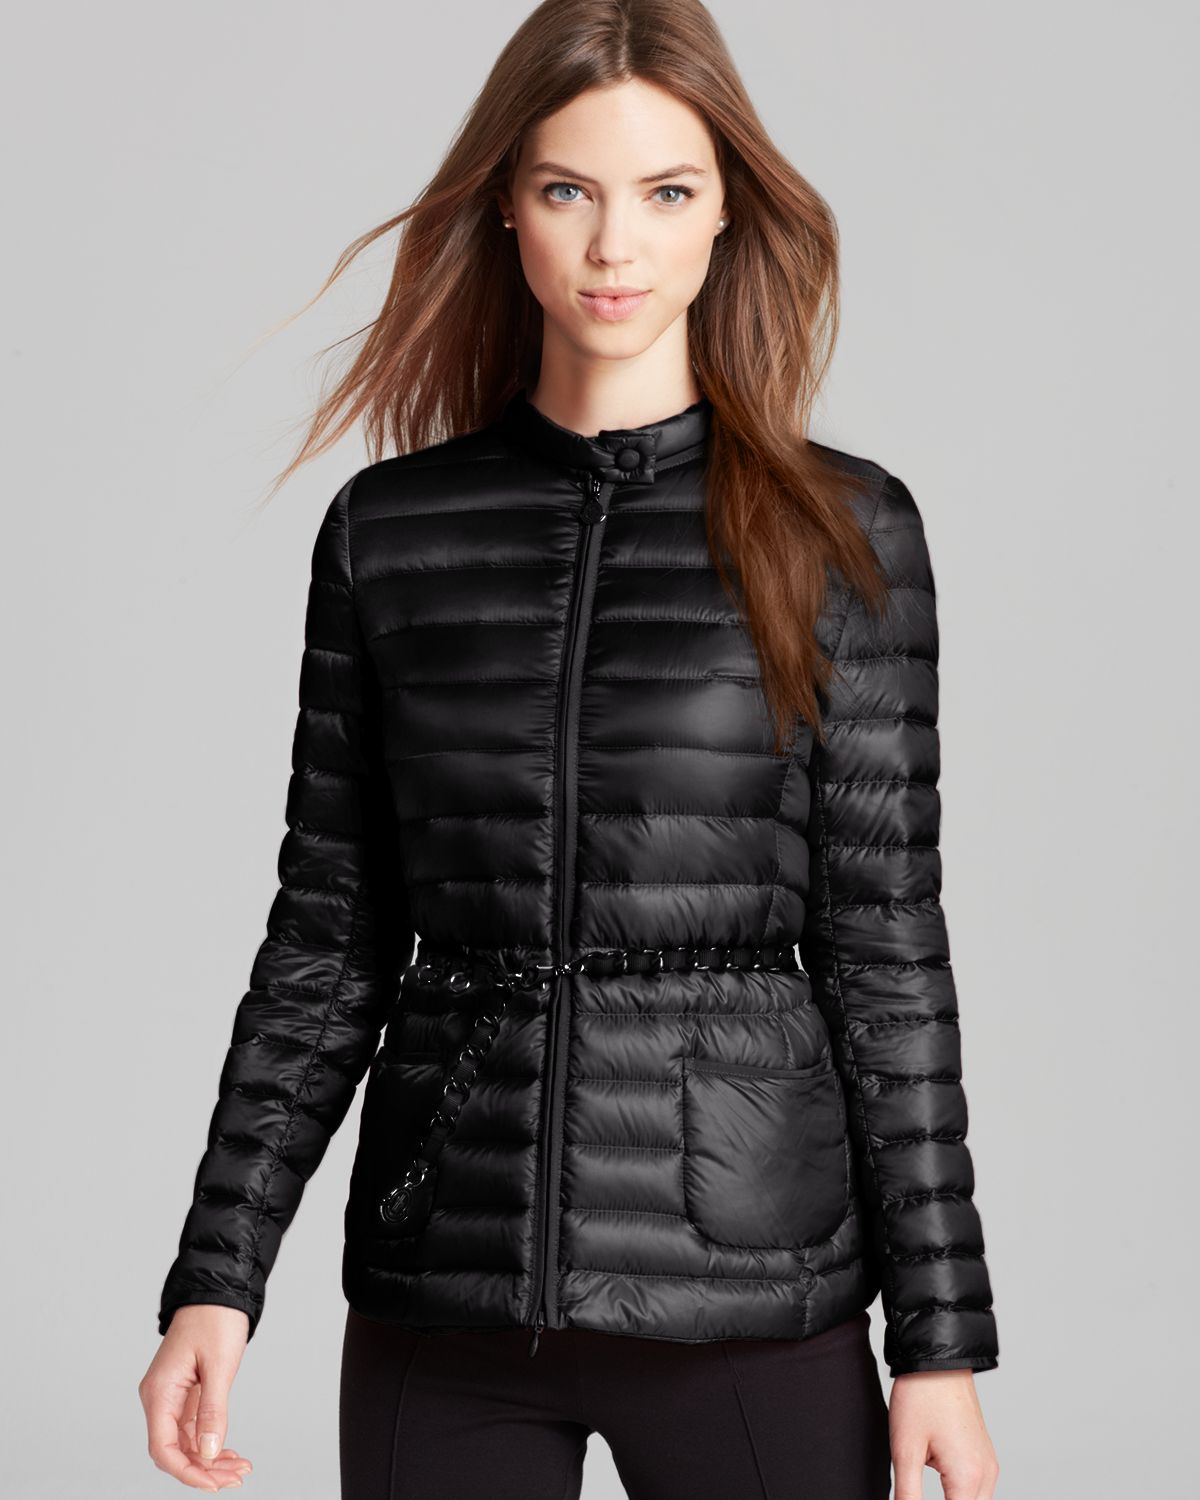 Lyst - Moncler Dalila Lightweight Down Jacket in Black